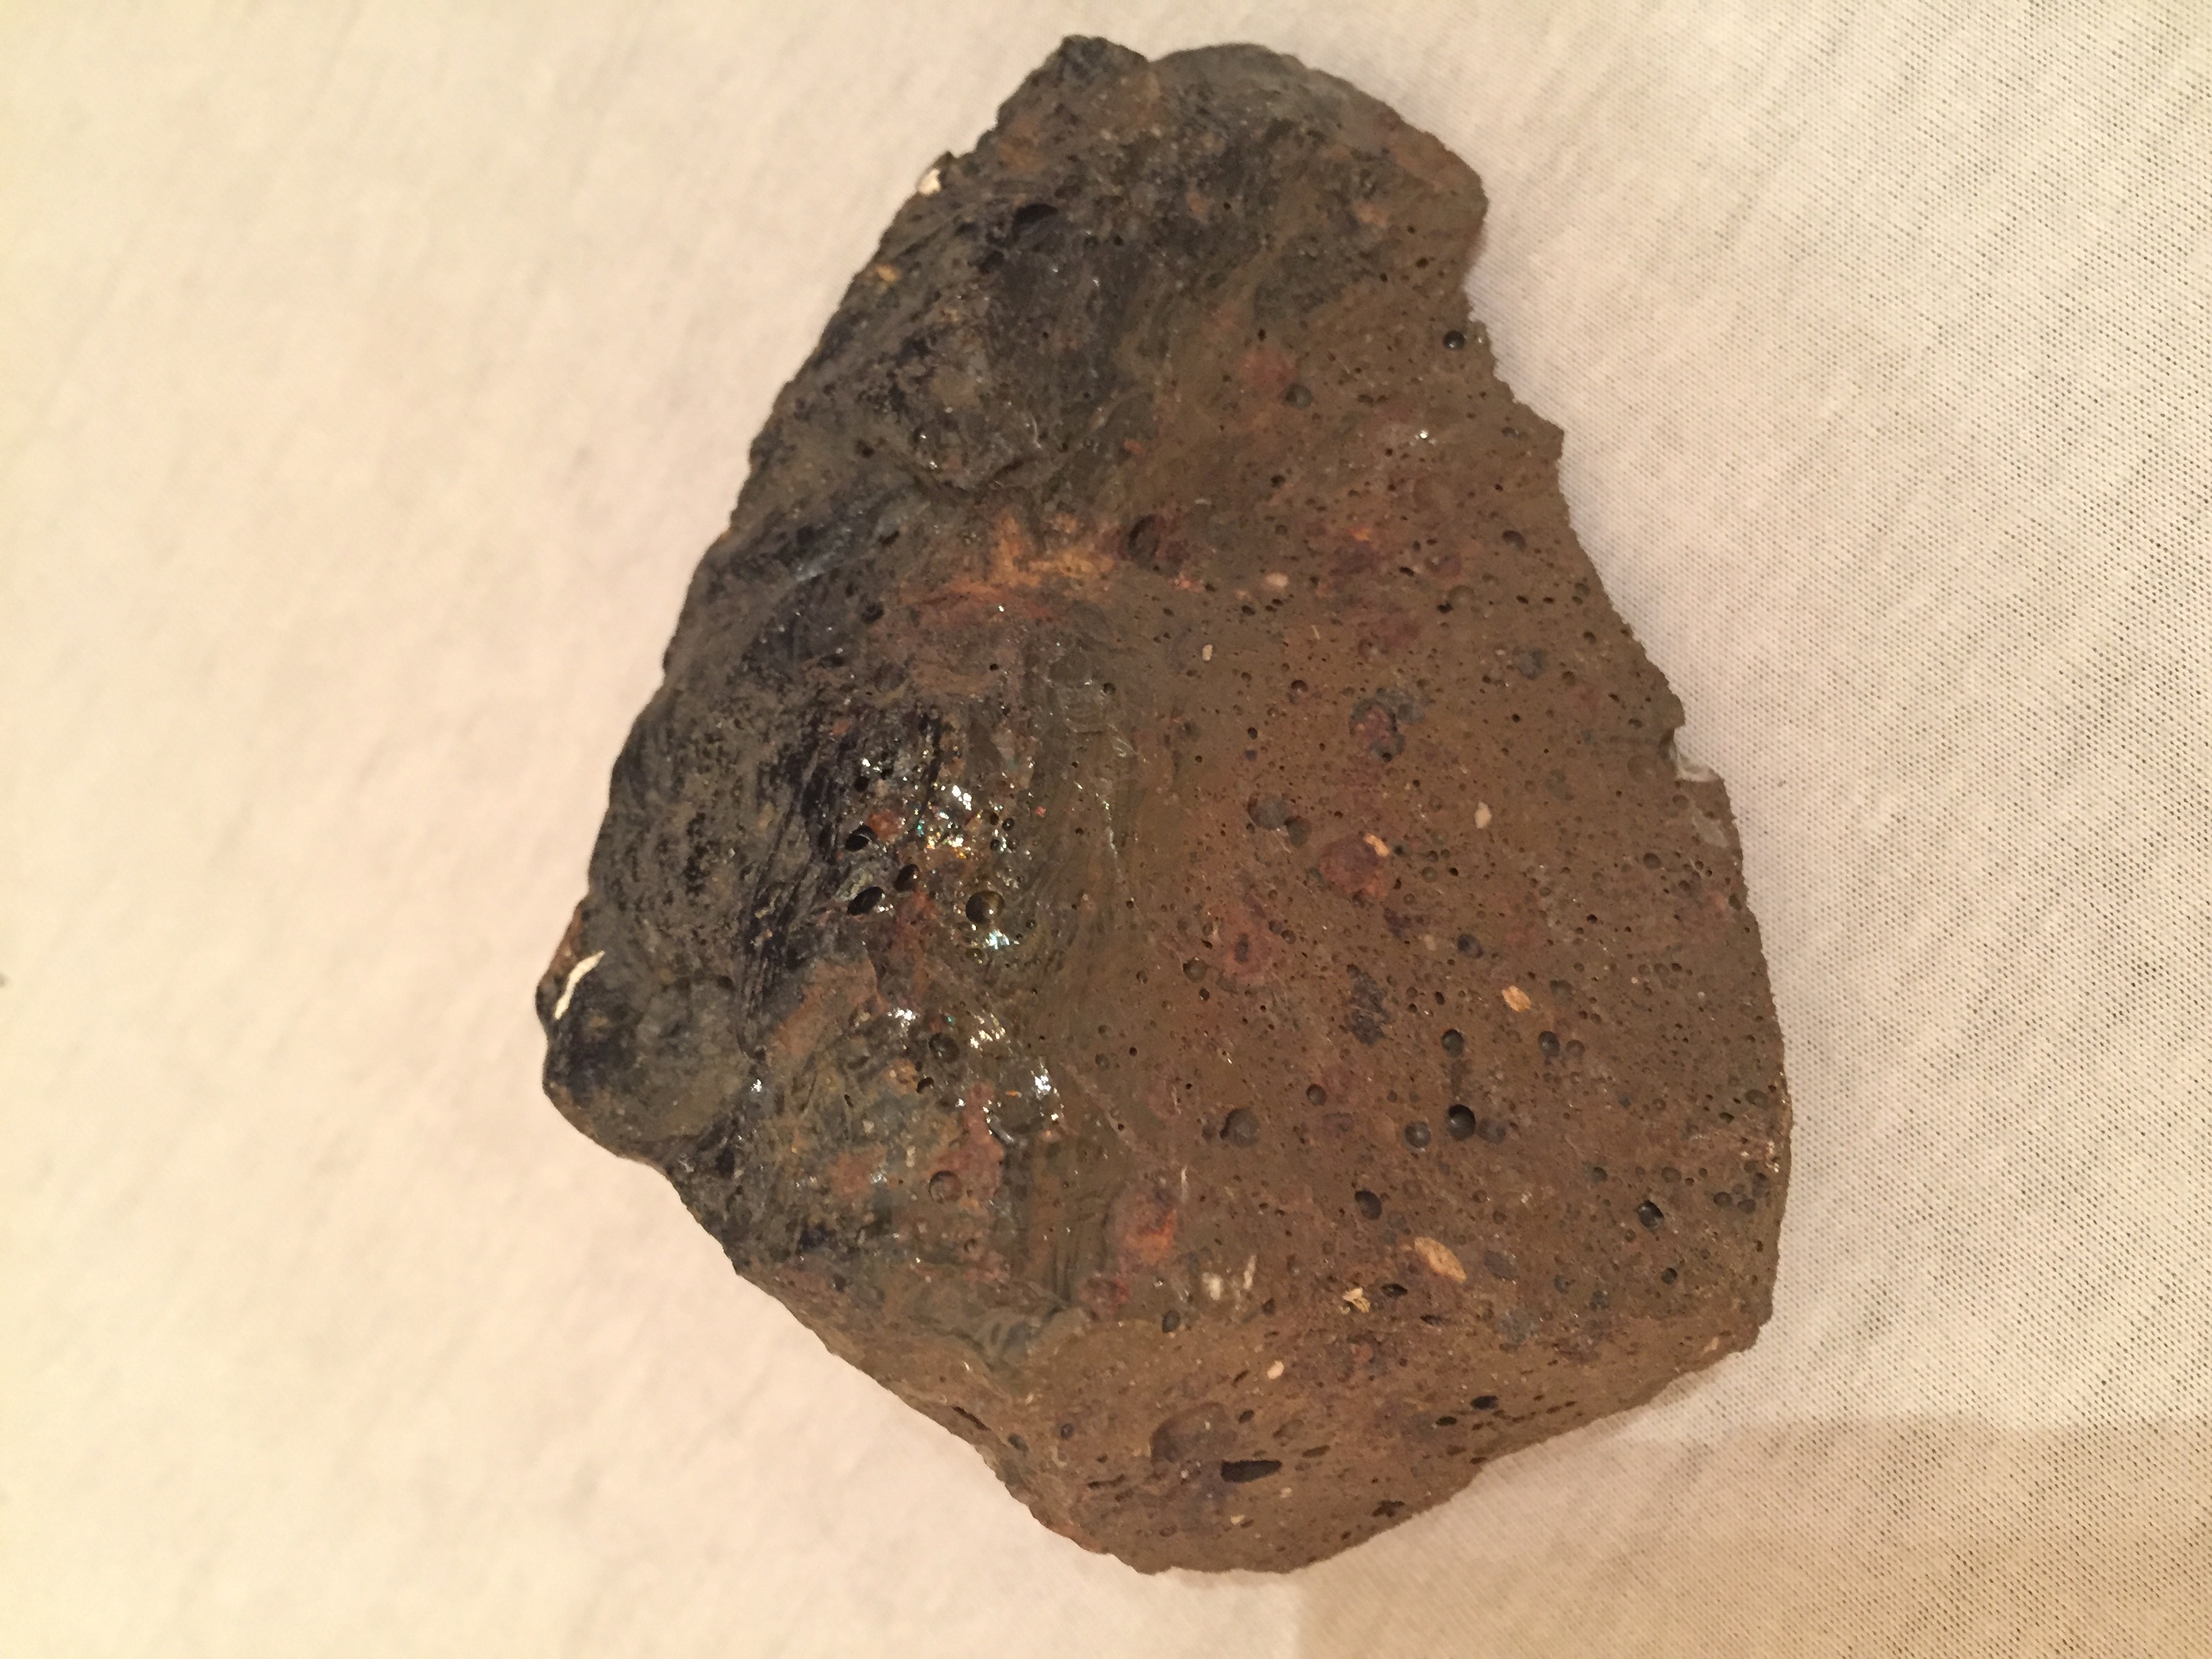 NaturePlus: Help in identifying these two brown rocks.